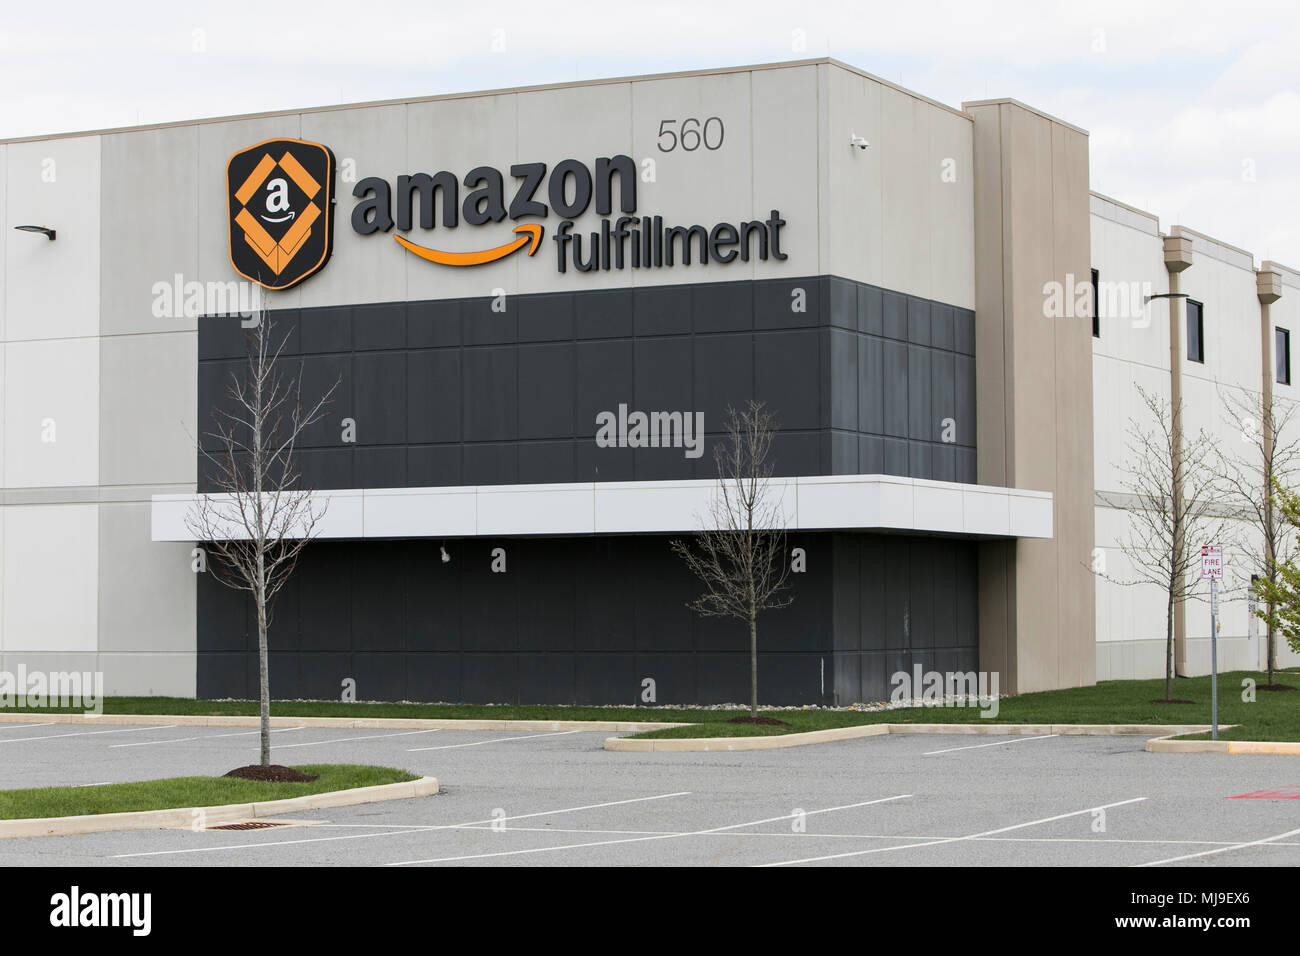 A logo sign outside of a Amazon fulfillment center in Middletown, Delaware on April 29, 2018. Stock Photo